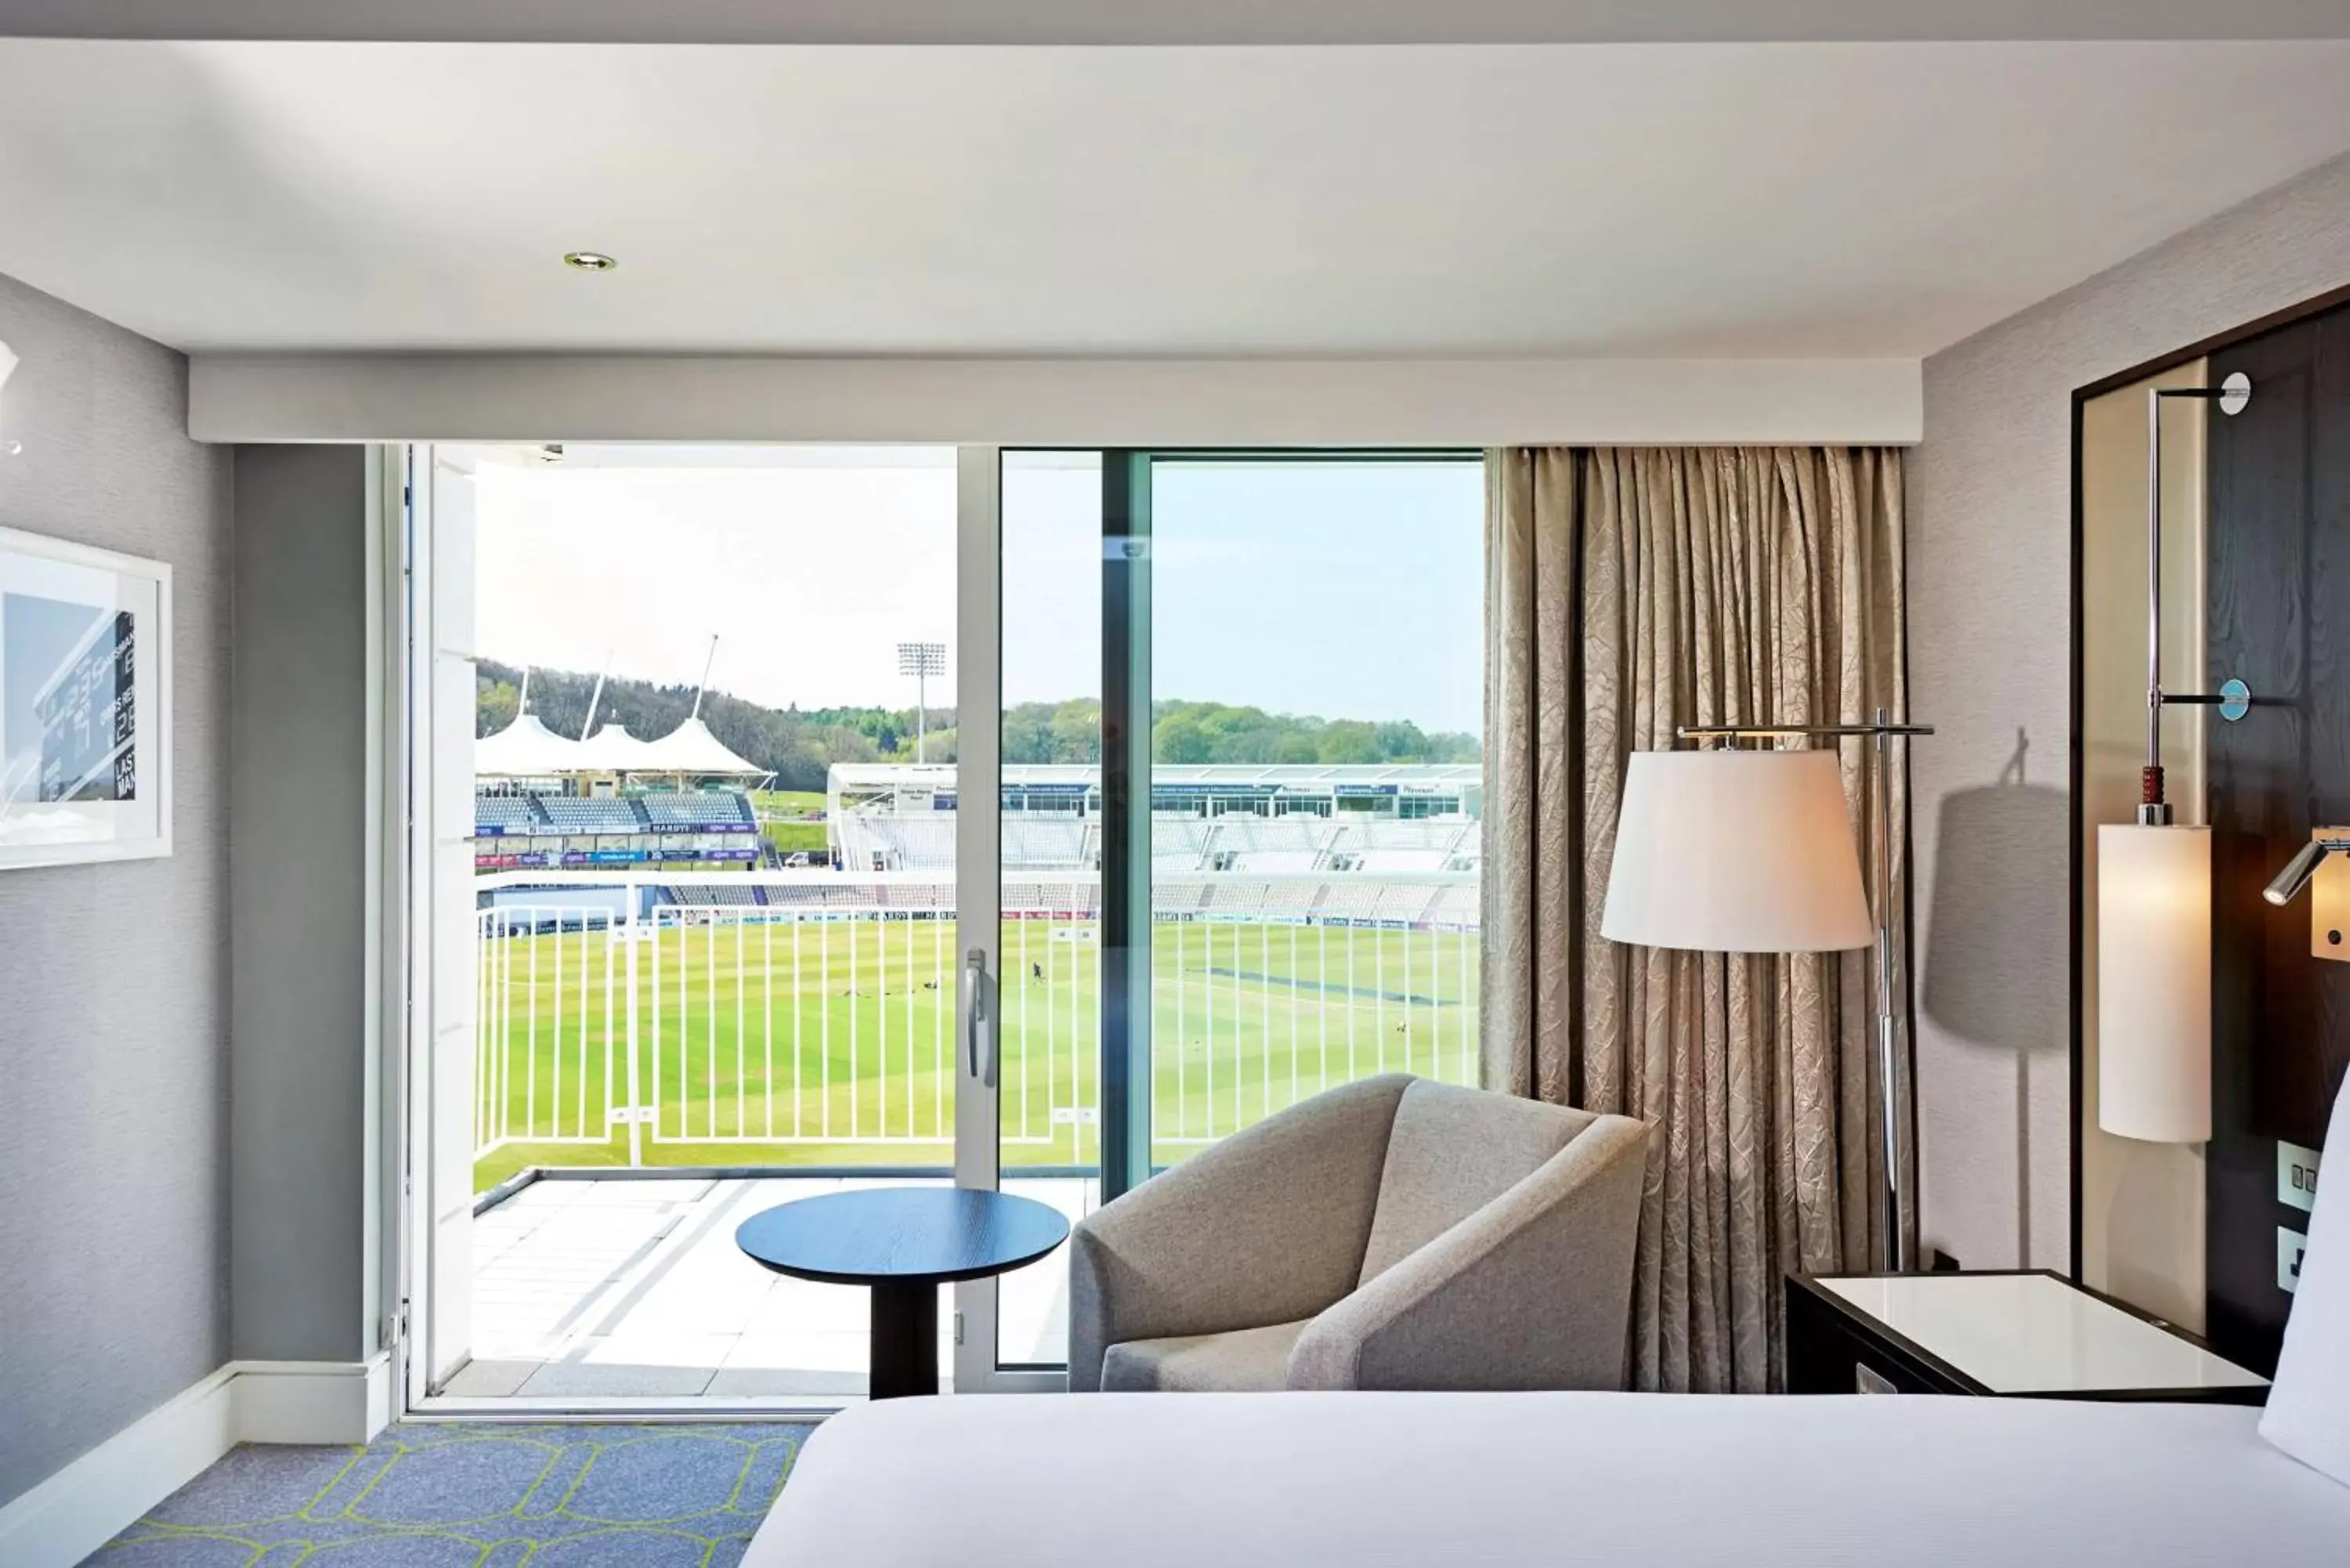 Bed in Hilton at the Ageas Bowl, Southampton